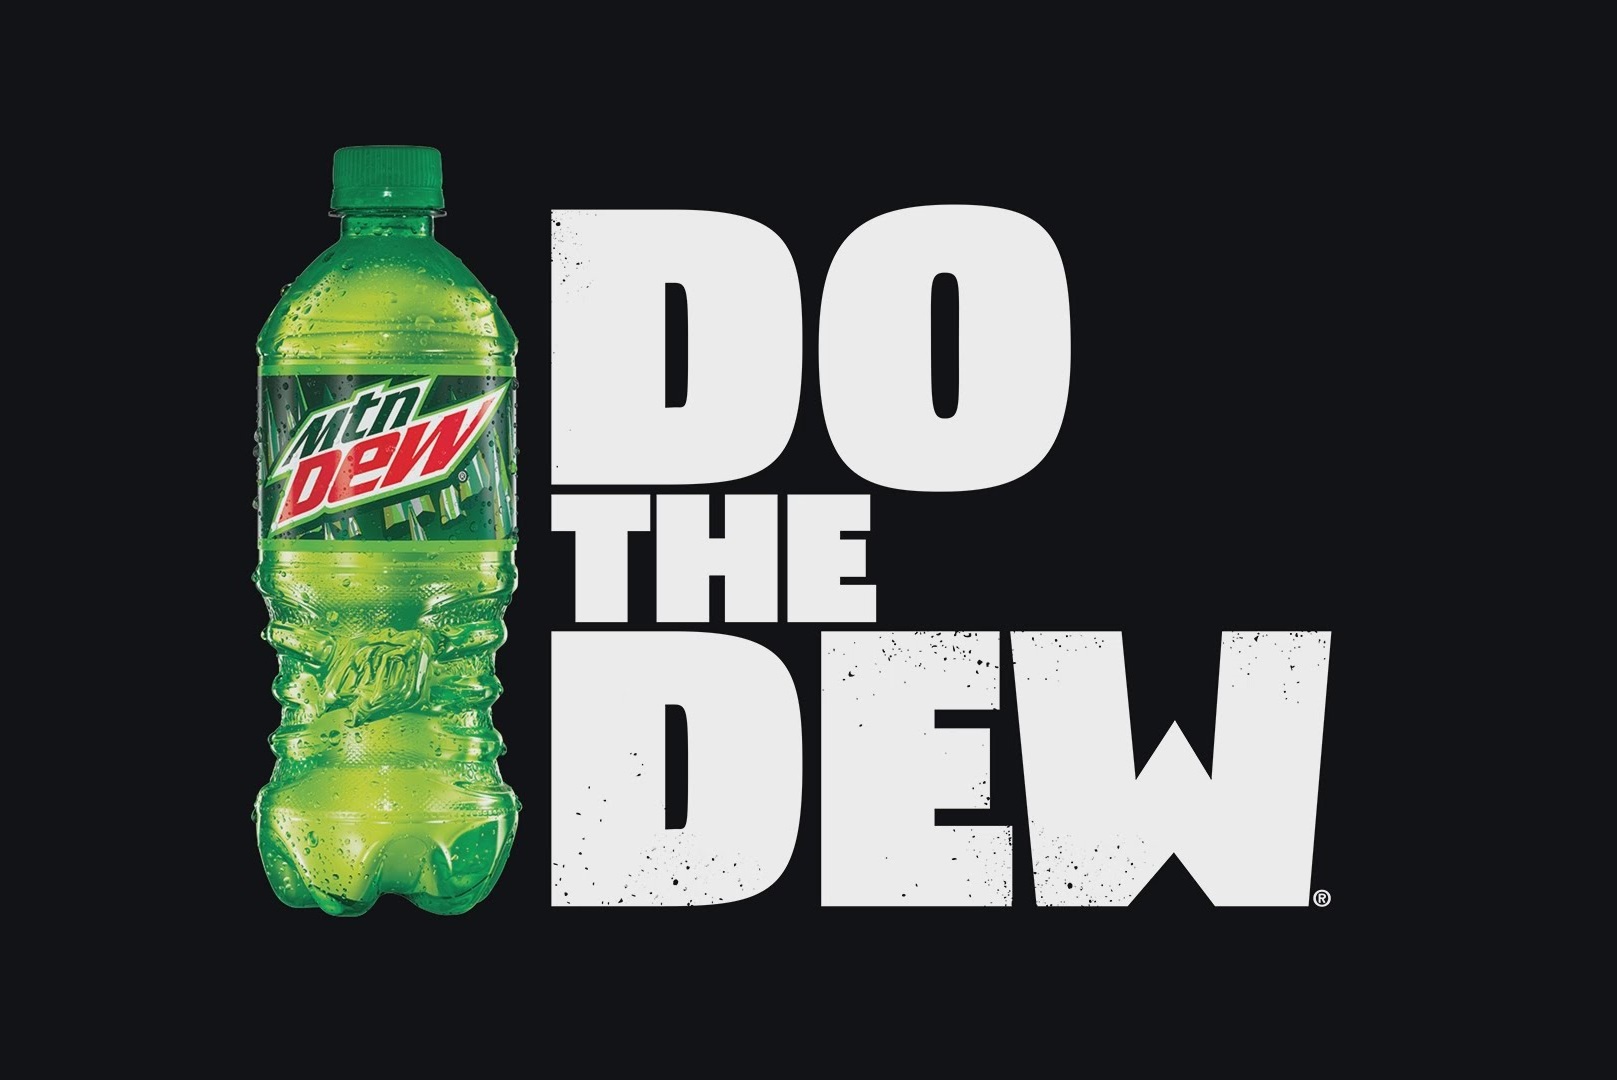 mountain dew voltage commercial